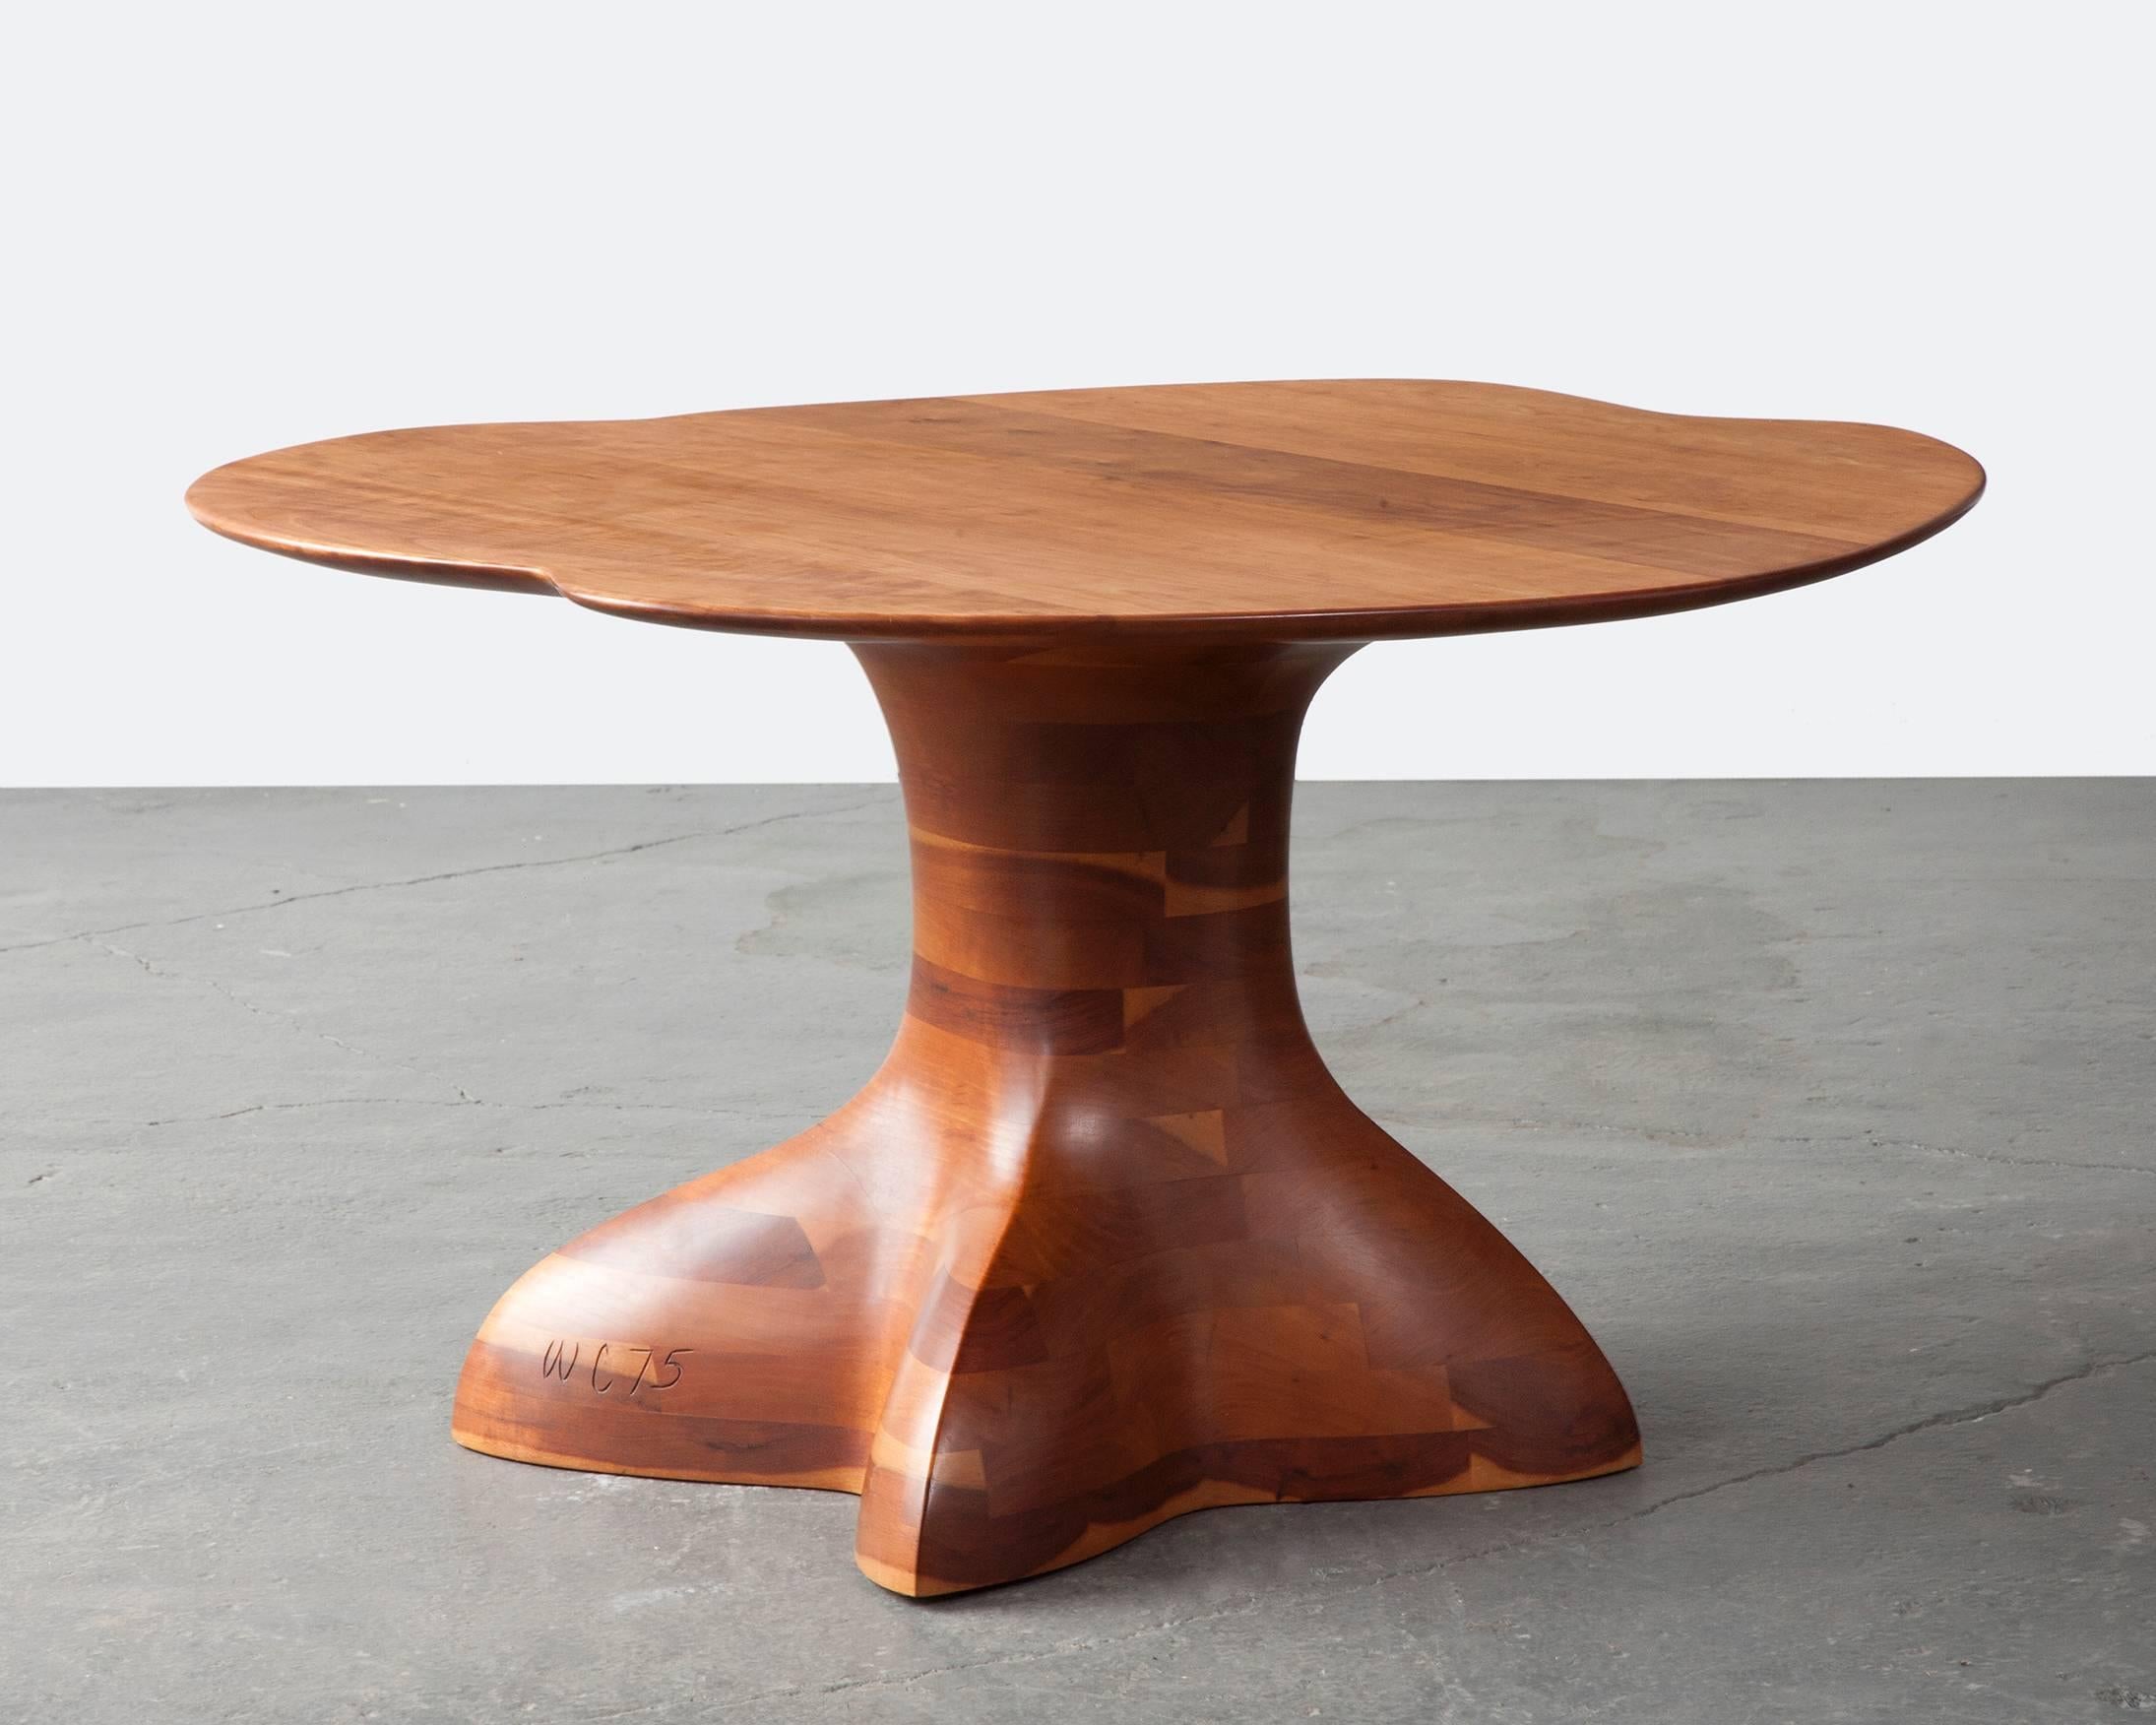 Unique coffee table in stack laminated cherry. Designed and made by Wendell Castle, Rochester, New York, 1975. Signed and dated 